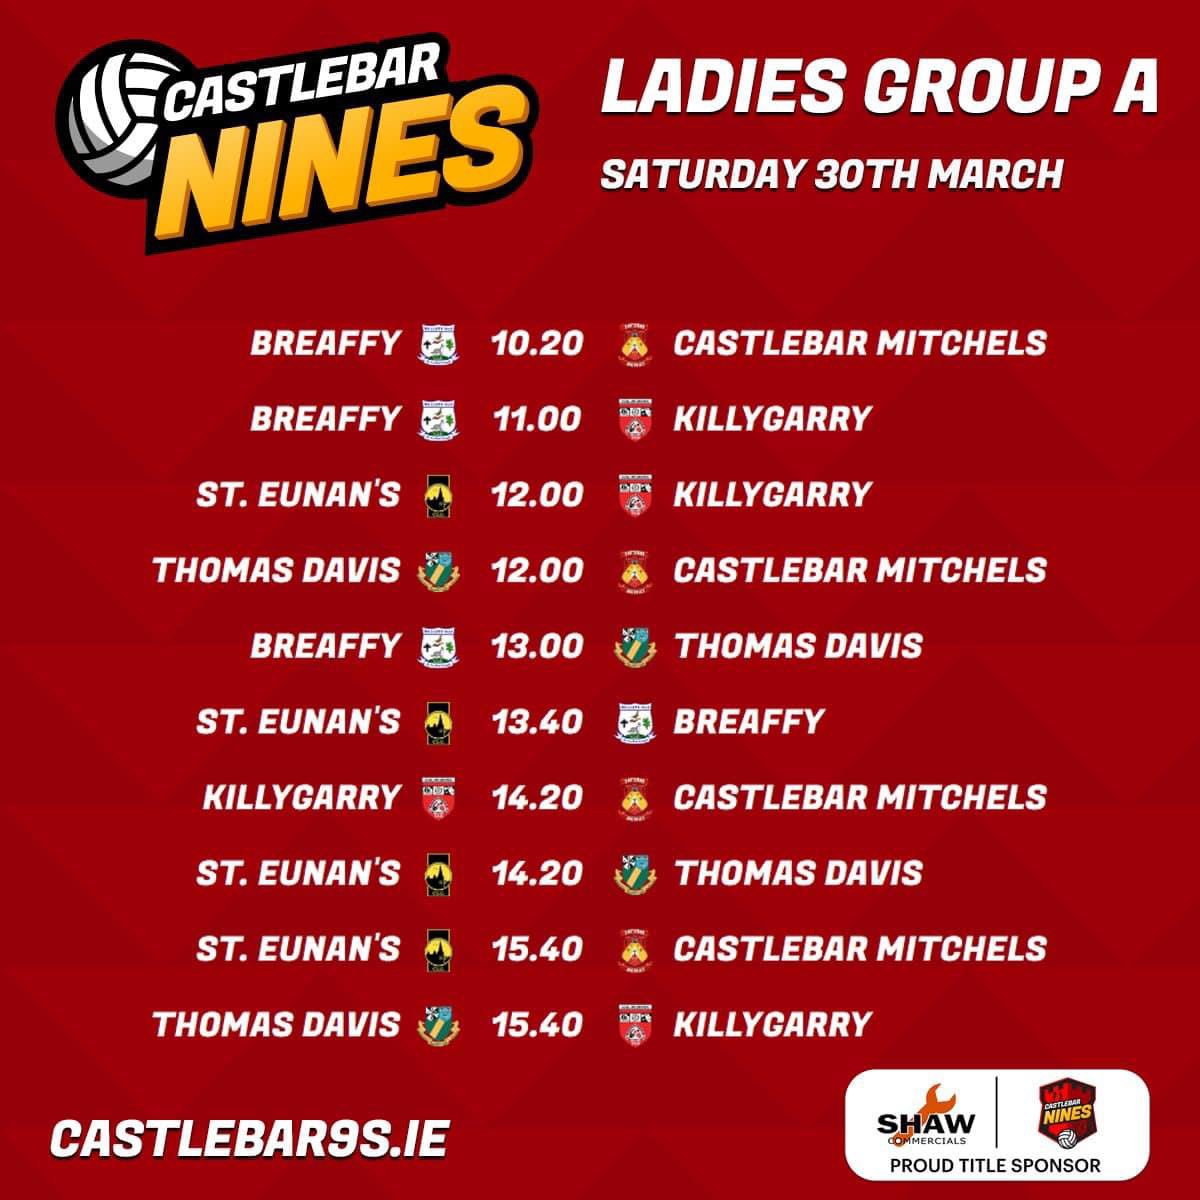 Best of luck to our senior men's + ladies football teams as they take part in the @MitchelsGaa 9's comp this weekend. It looks like a great weekend ahead for all involved!